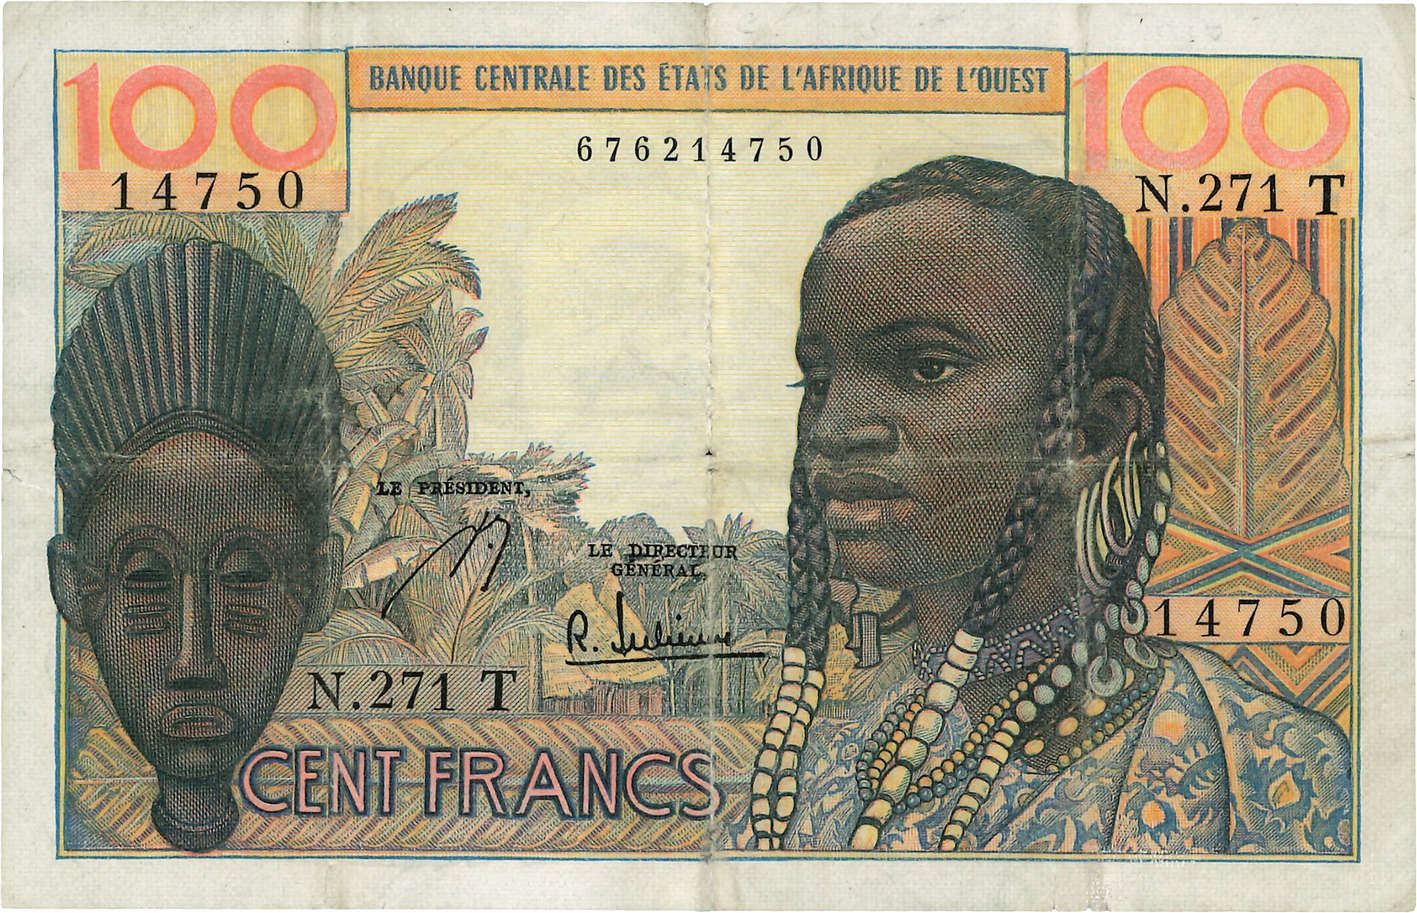 100 Francs WEST AFRICAN STATES  1965 P.801Tg F+